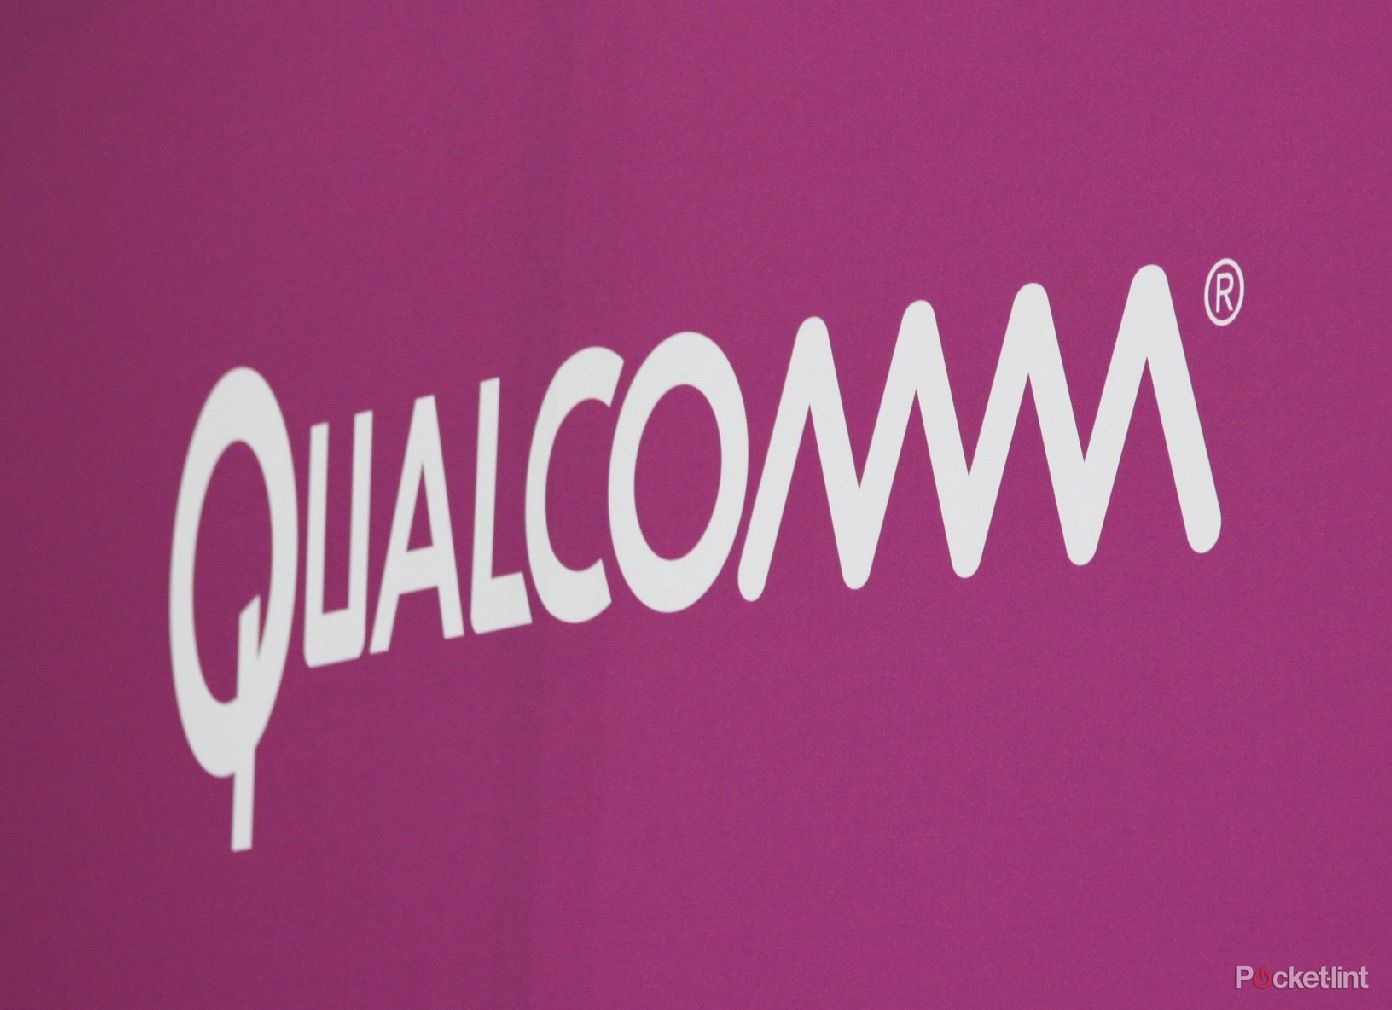 qualcomm wants to mirror snapdragon success in your home car and the city you live image 1